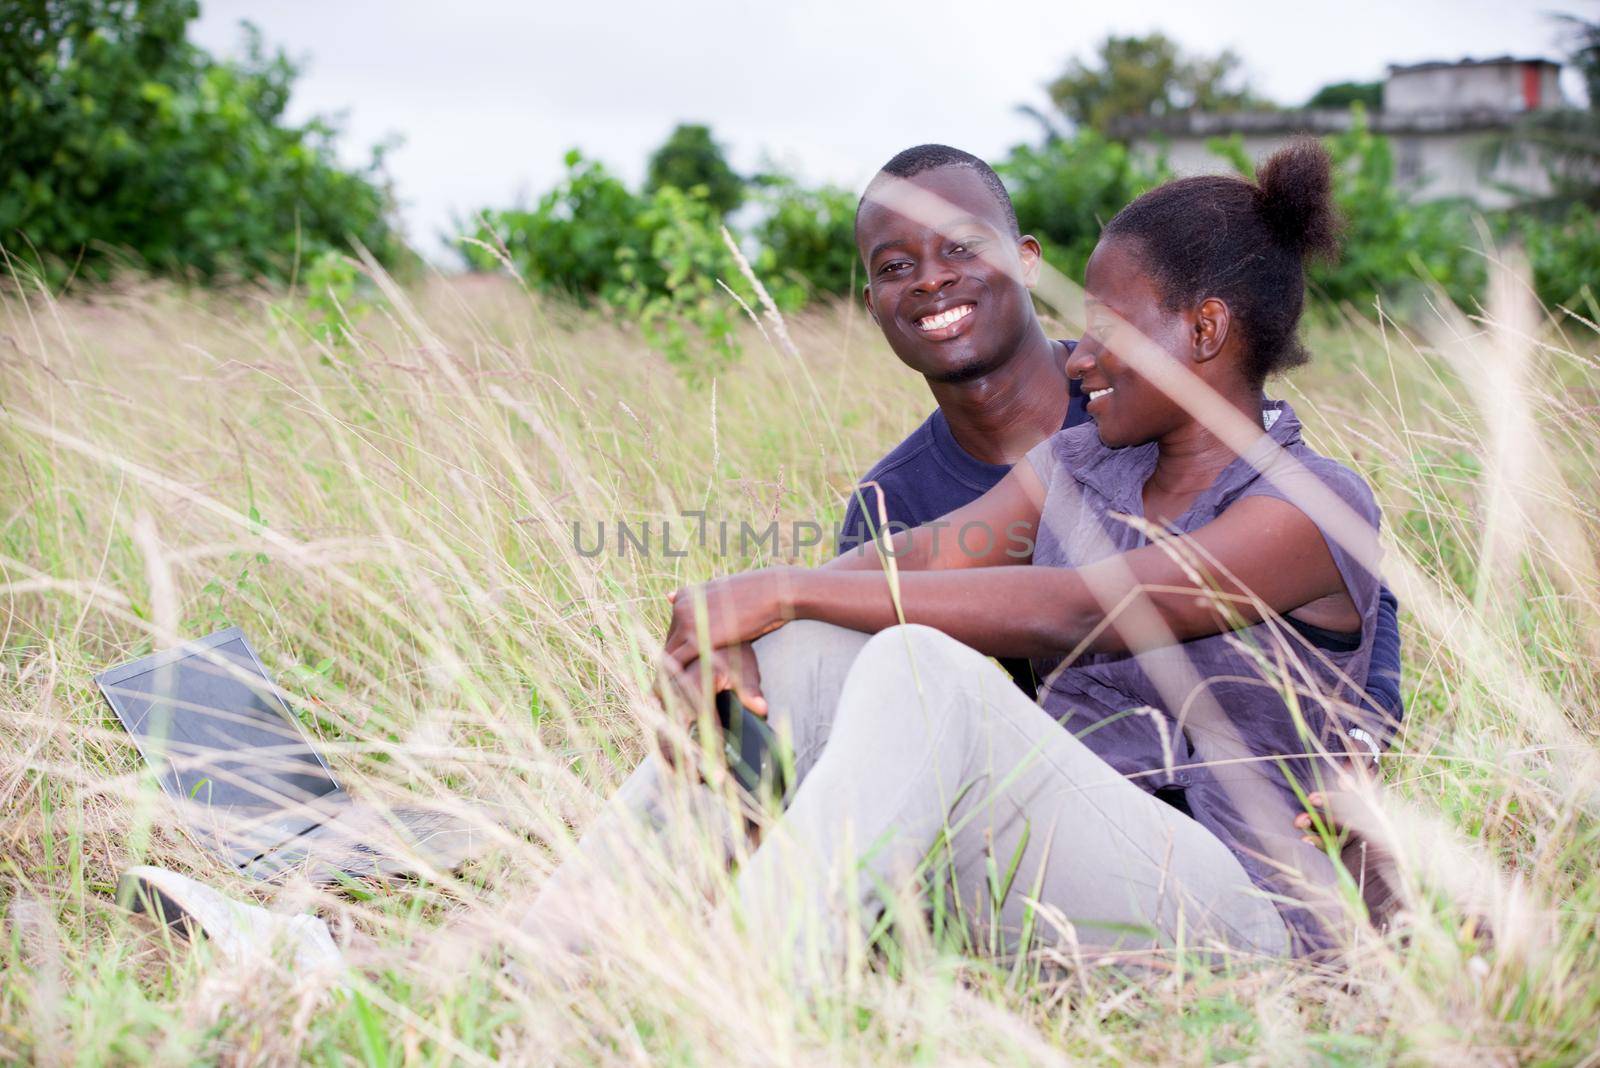 happy young couple in love relaxes sitting in the grass in summer. Positive man and a woman having fun enjoying the outdoors and nature.